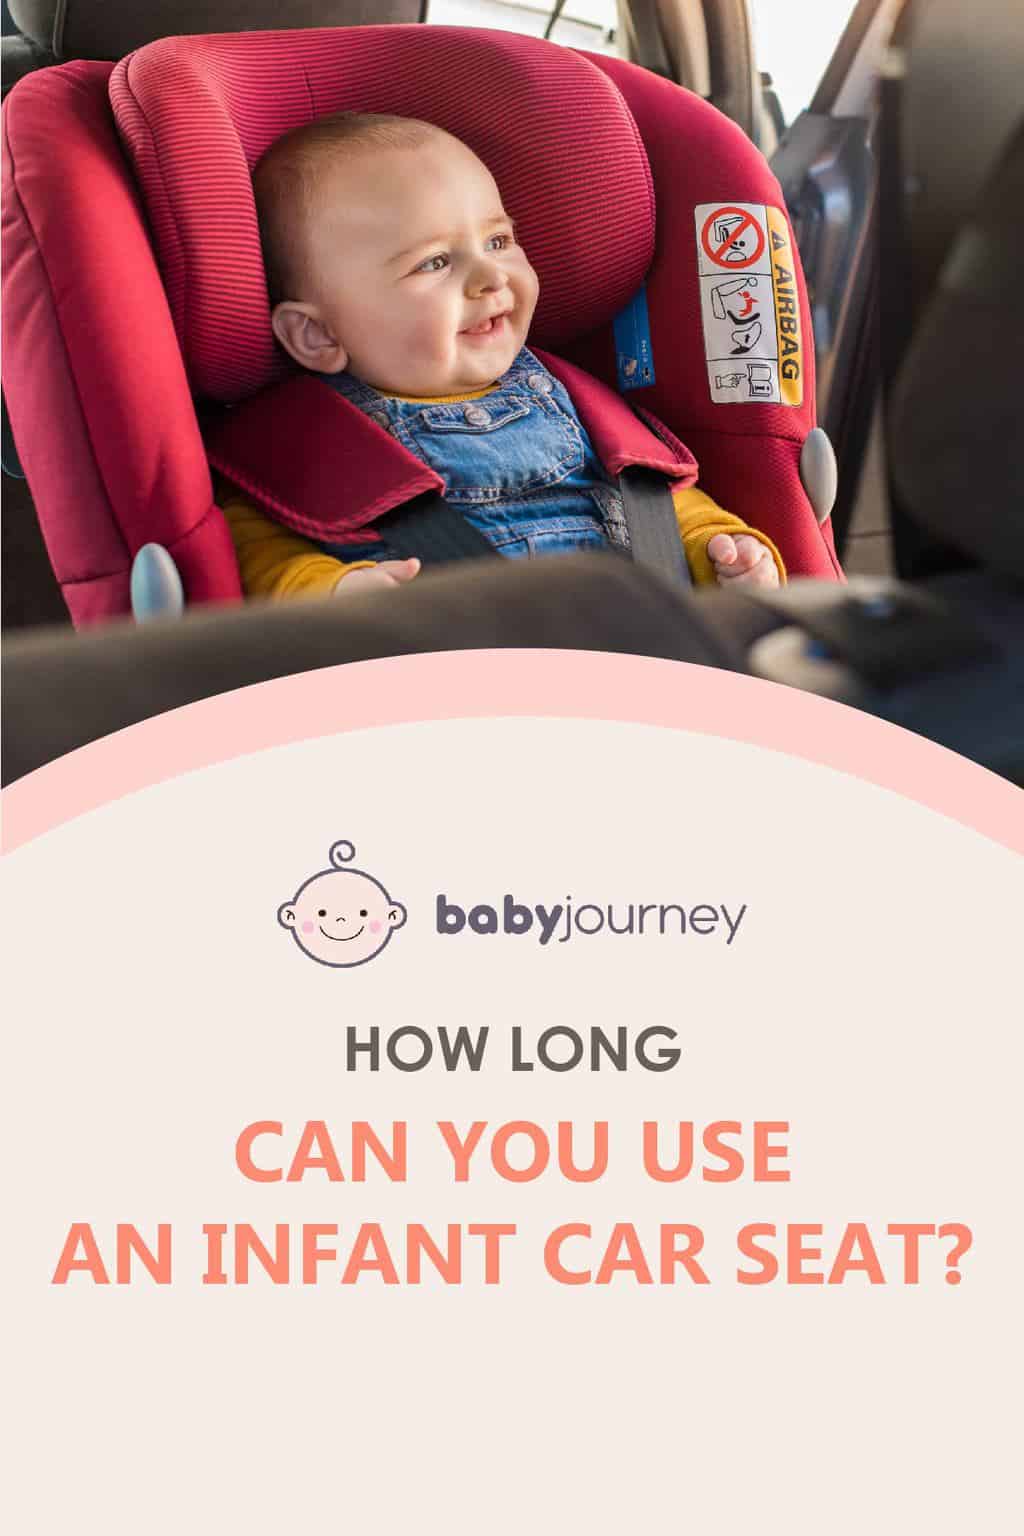 How Long Can You Use An Infant Car Seat? | Babyjourney